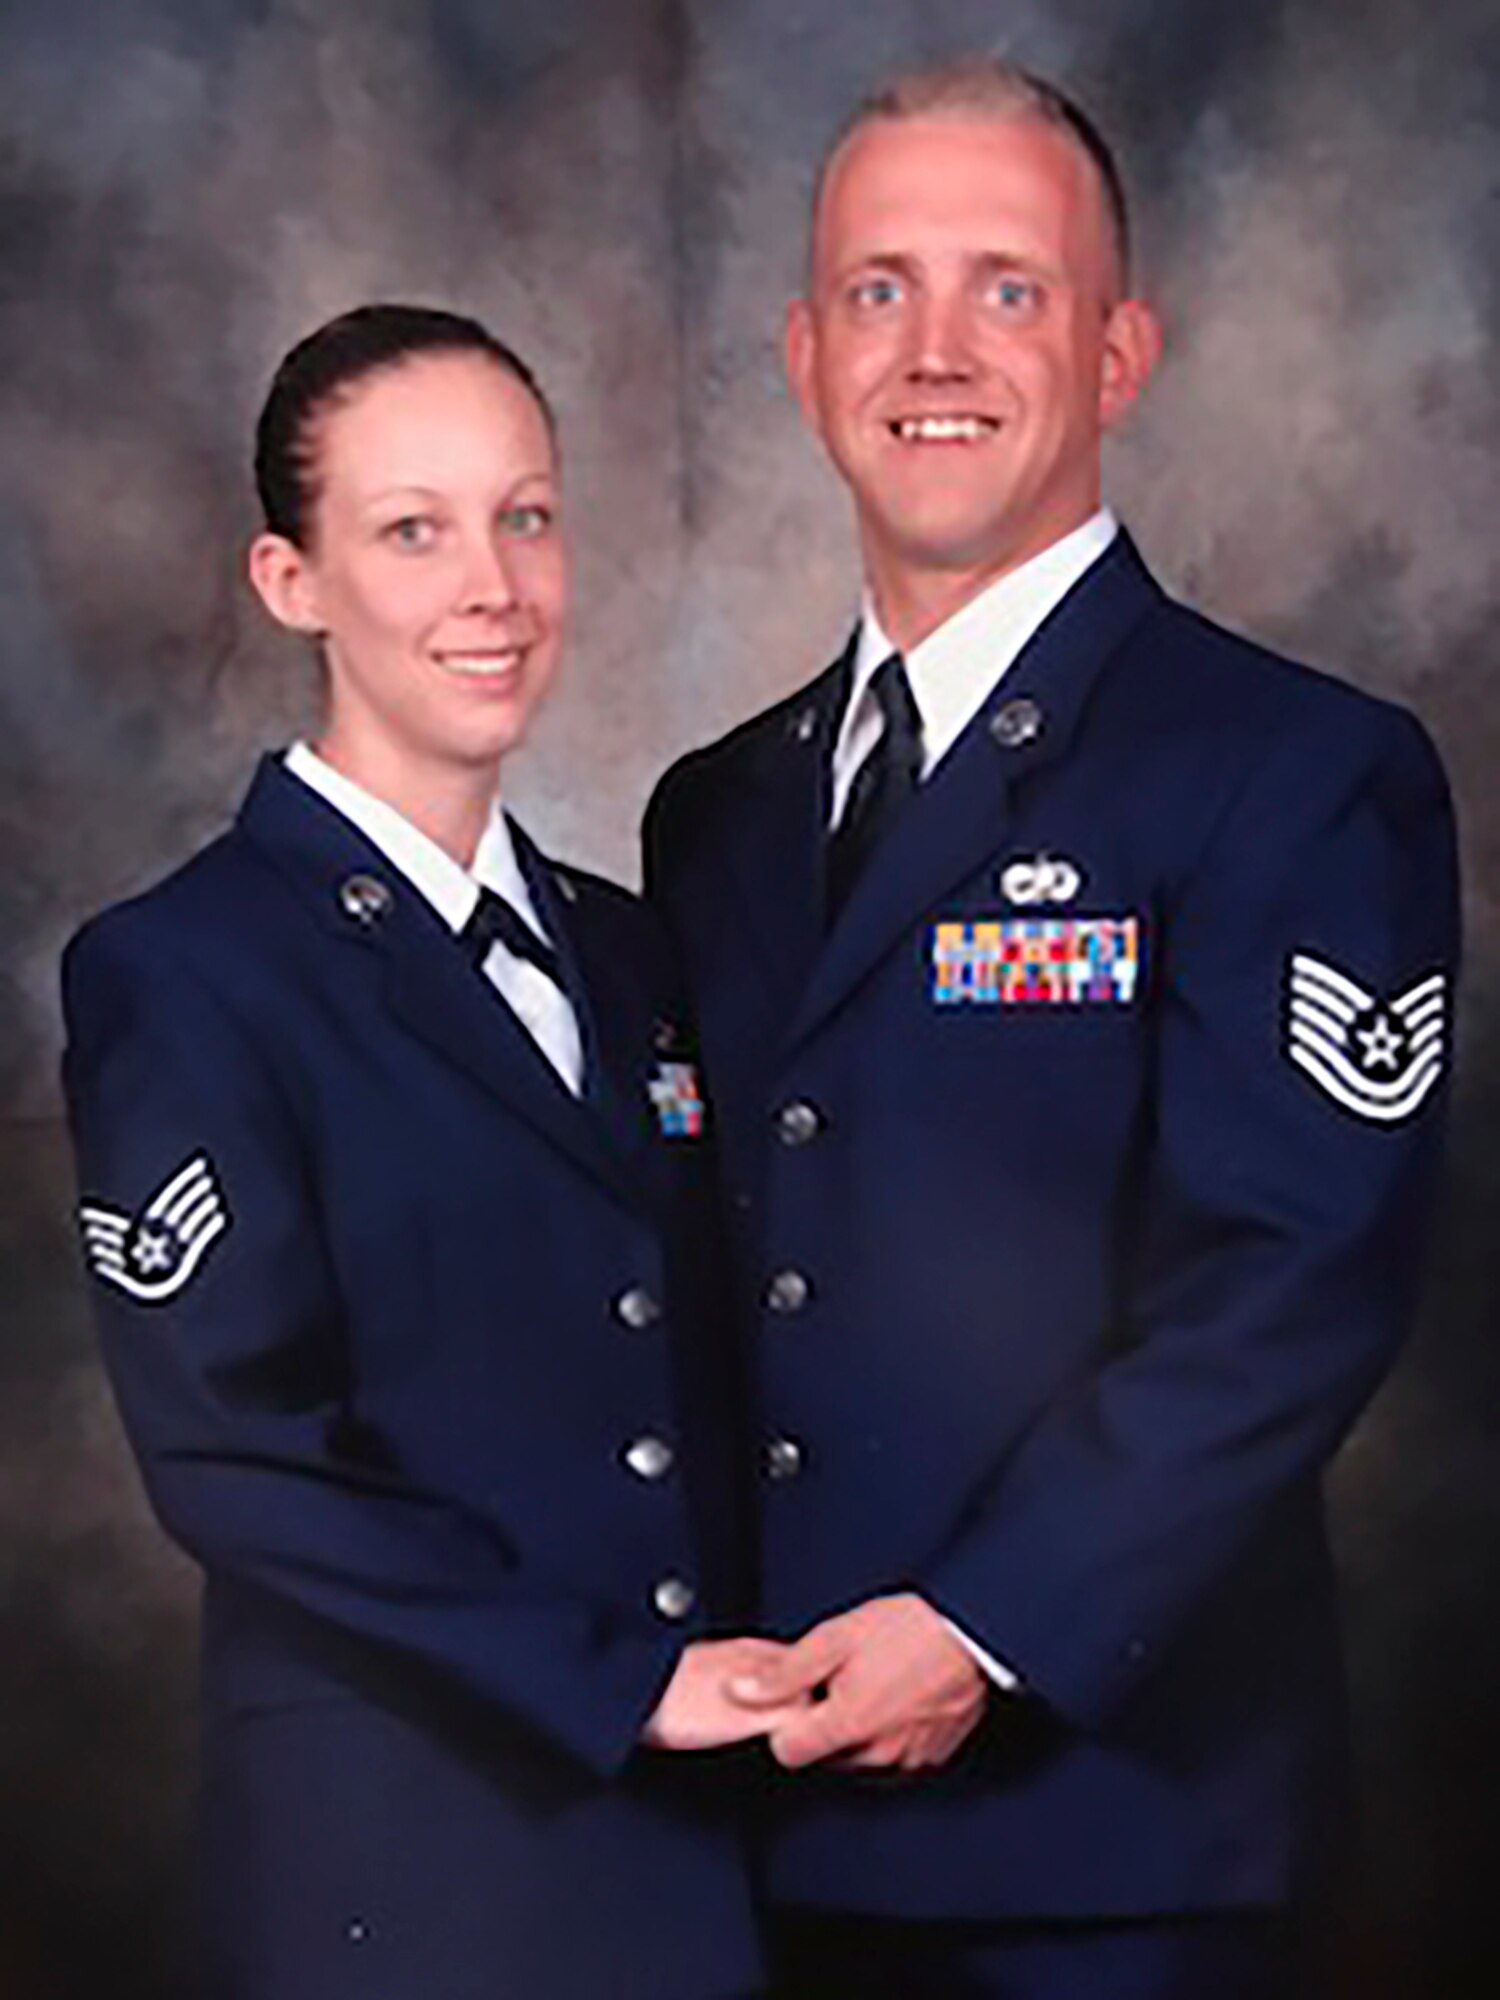 Master Sgt. Stephanie Ruepp, 38th Rescue Squadron unit training manager and resource advisor, and her husband Ret. Senior Master Sgt. Donal Ruepp, pose for a photo during a symposium in 2006, in San Antonio, Tx. Ruepp has recently been announced as the Georgia representative for the Elizabeth Dole Foundation Military and Veteran caregiver fellows program. As a fellow, Ruepp will help caregivers provide anything to improve the quality of life for their loved one; from wheelchair accessible vehicles and home modifications to finding nearby support groups and treatment facilities. (Courtesy photo)